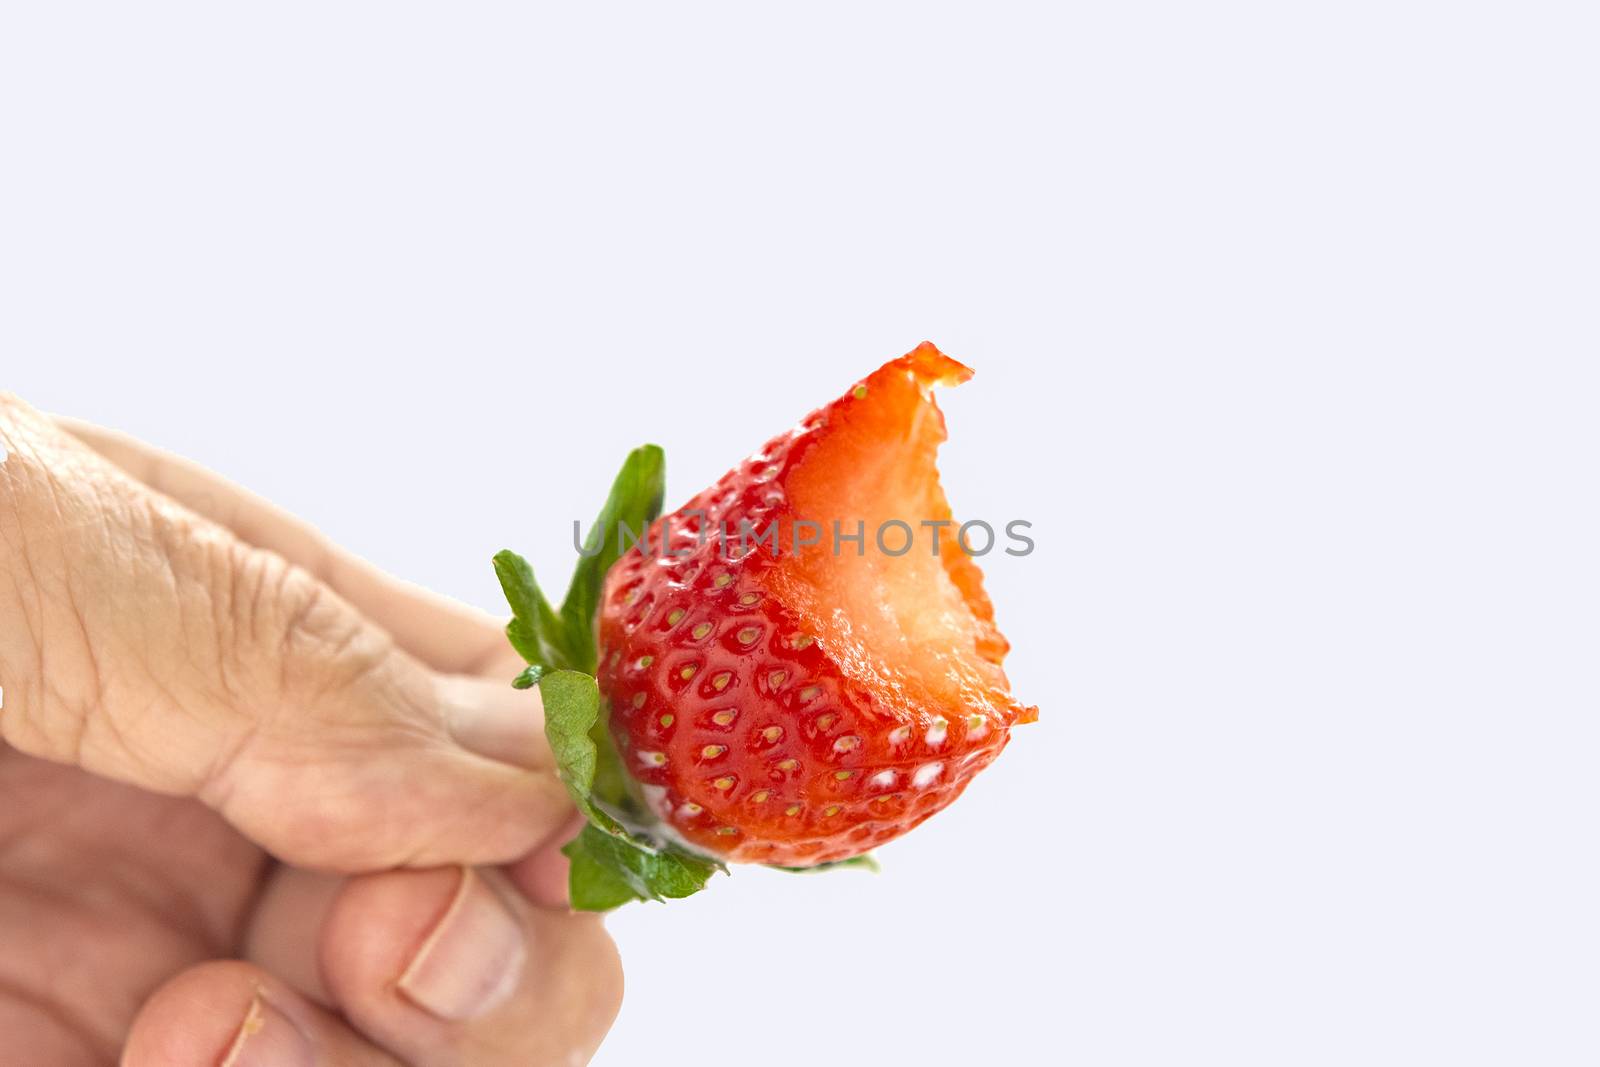 Bitten off red strawberry with green leaves in hand against white background